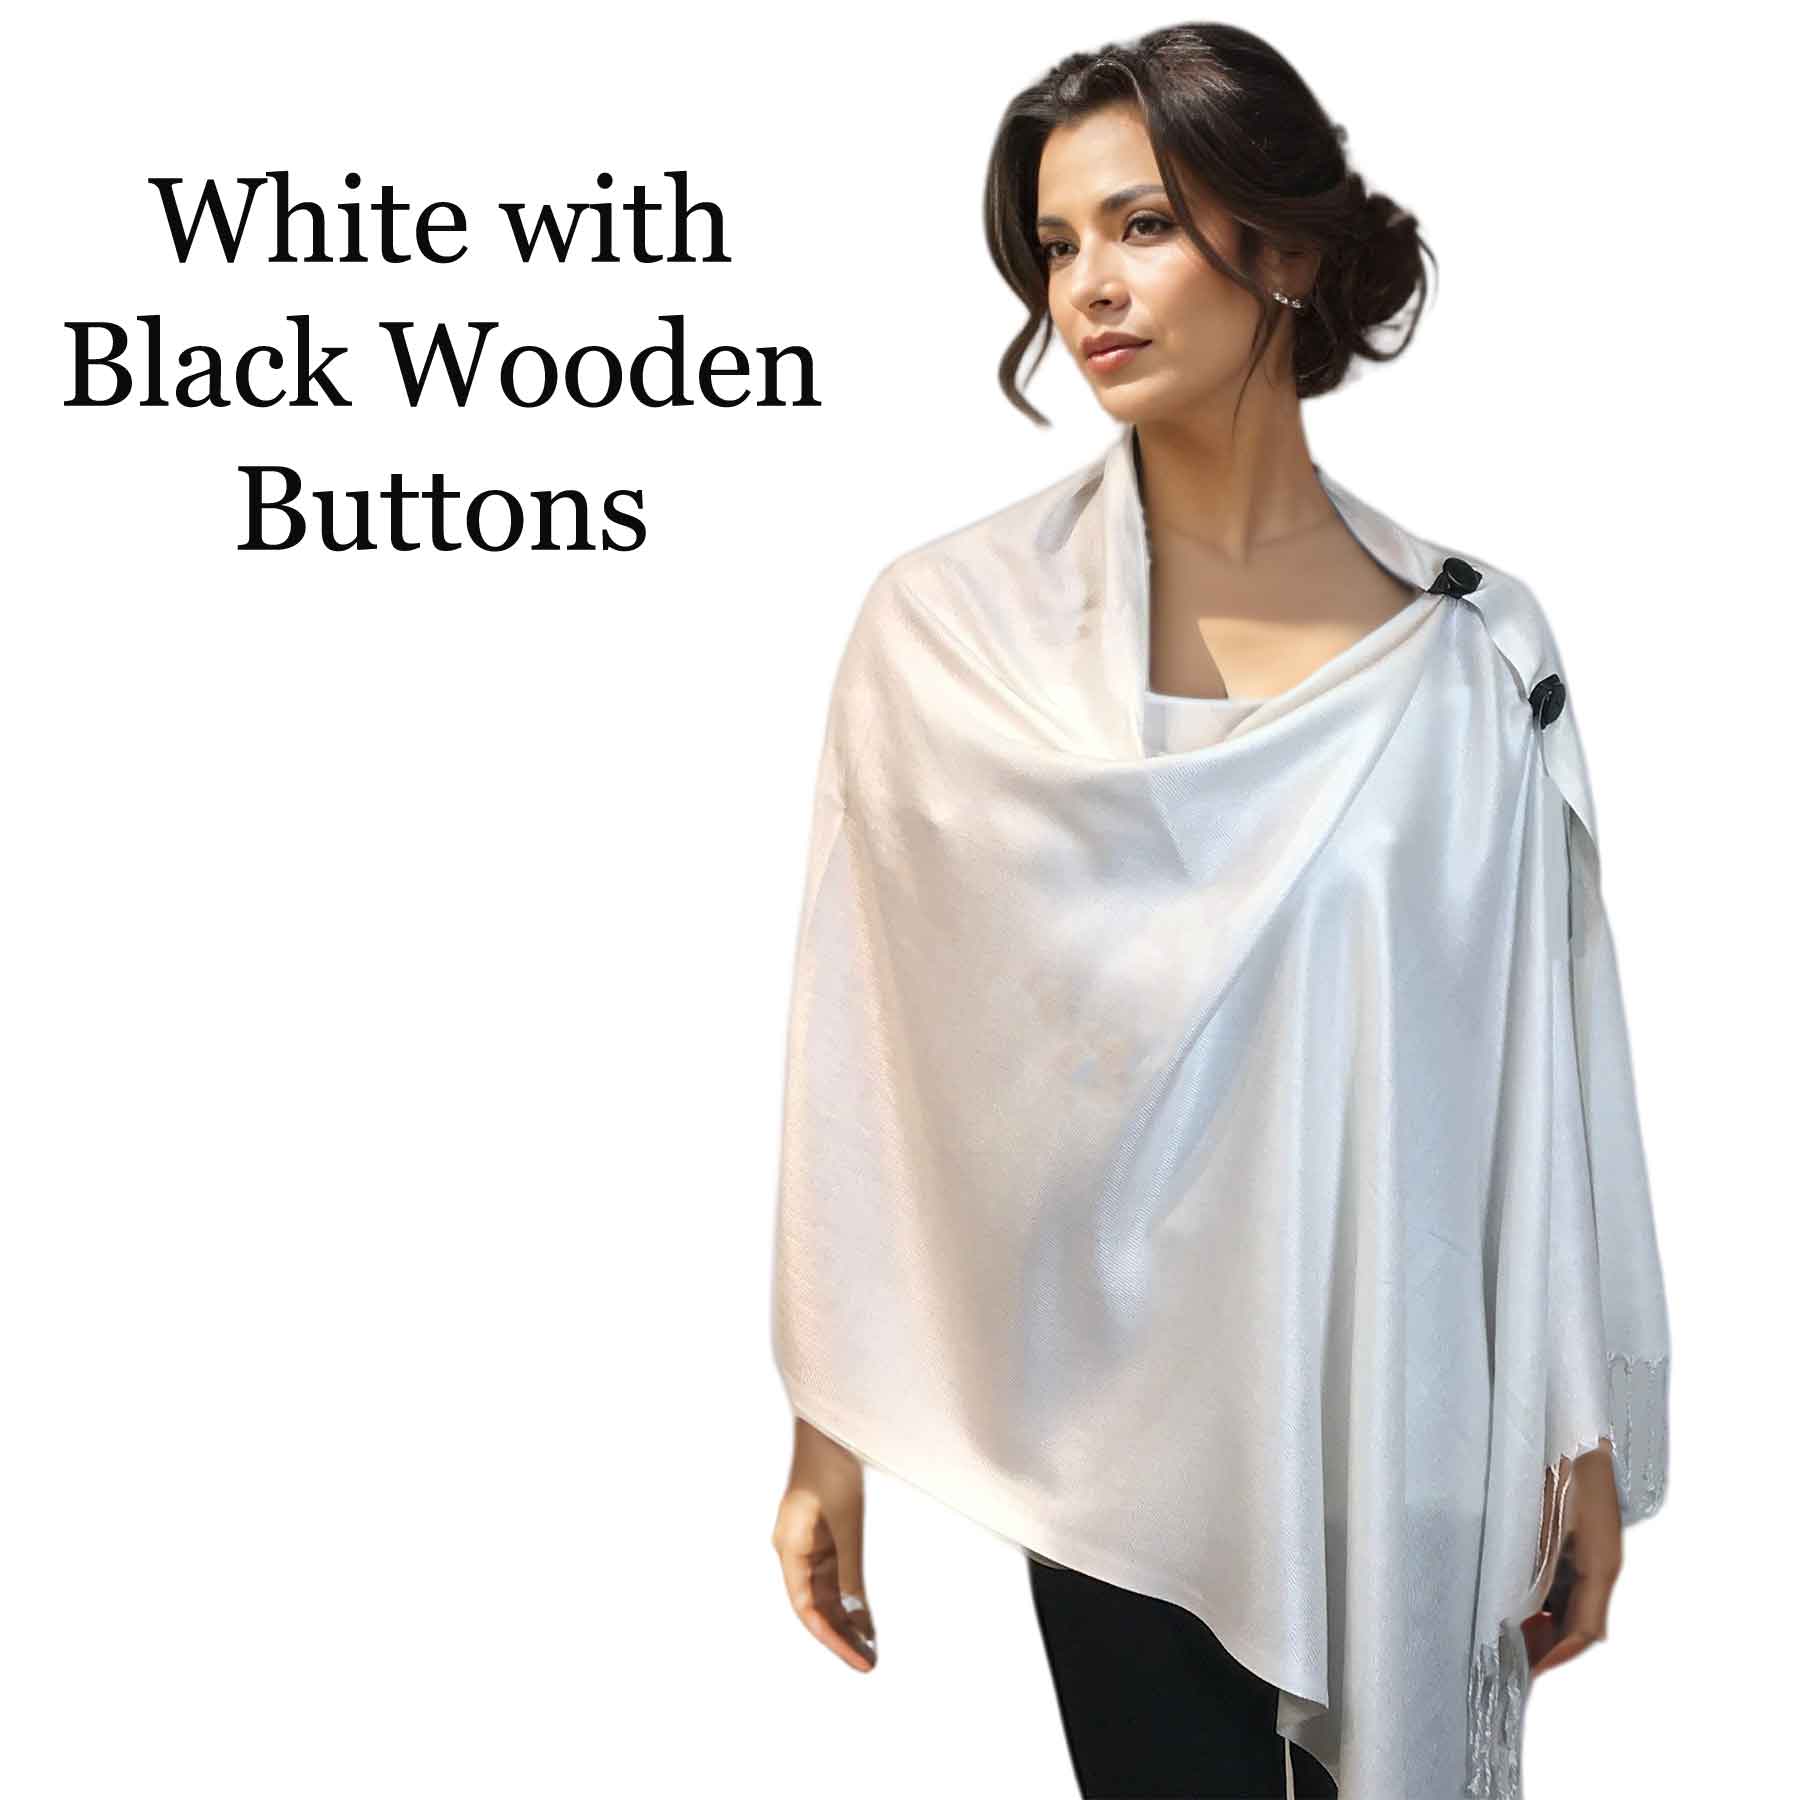 3109 - Solid White<br>
Pashmina Style Button Shawl